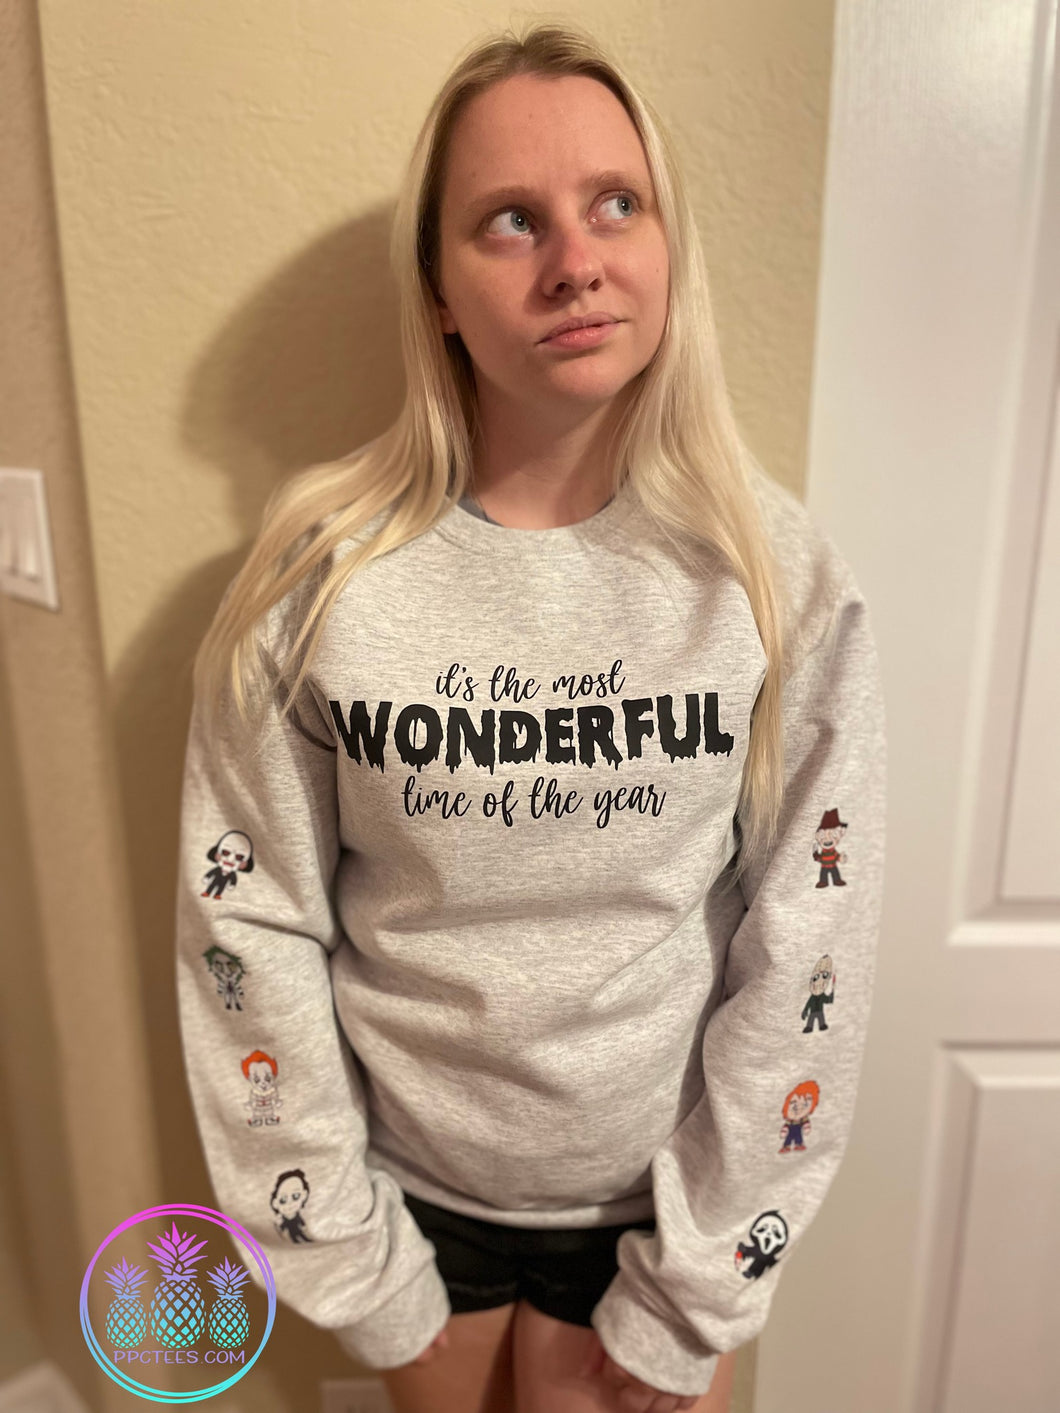 Most Wonderful Time of the Year Sweatshirt